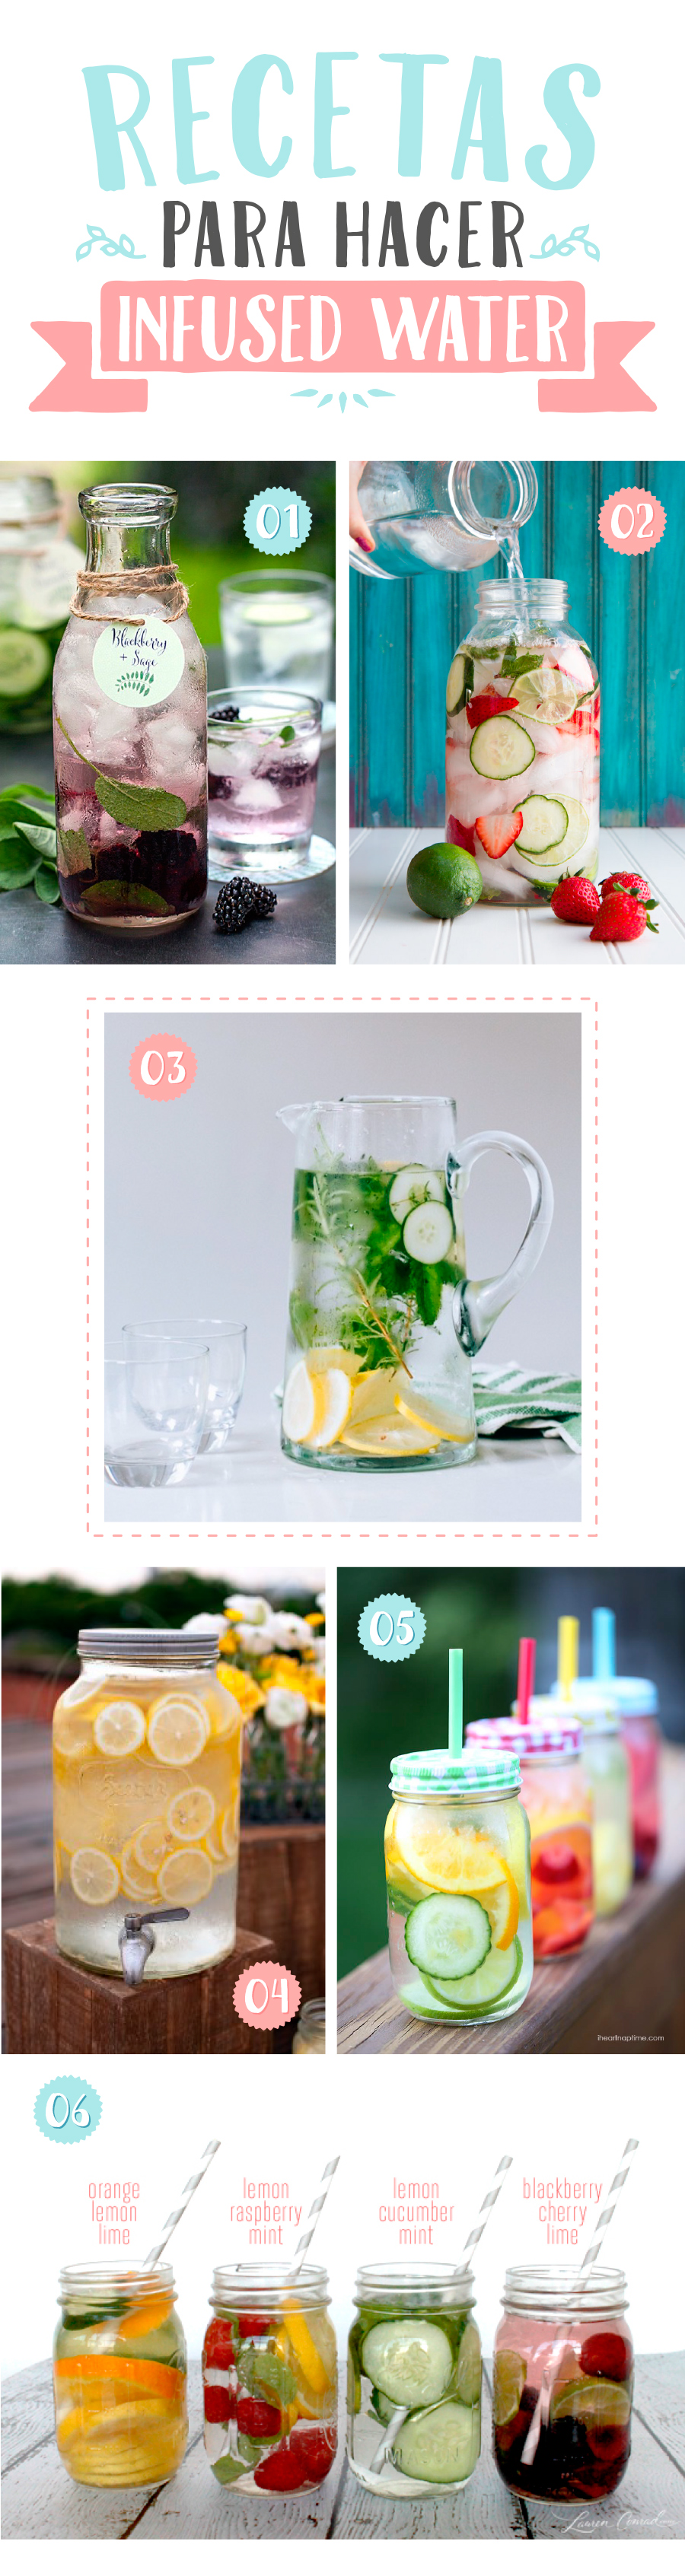 post-infused-water-parte-1